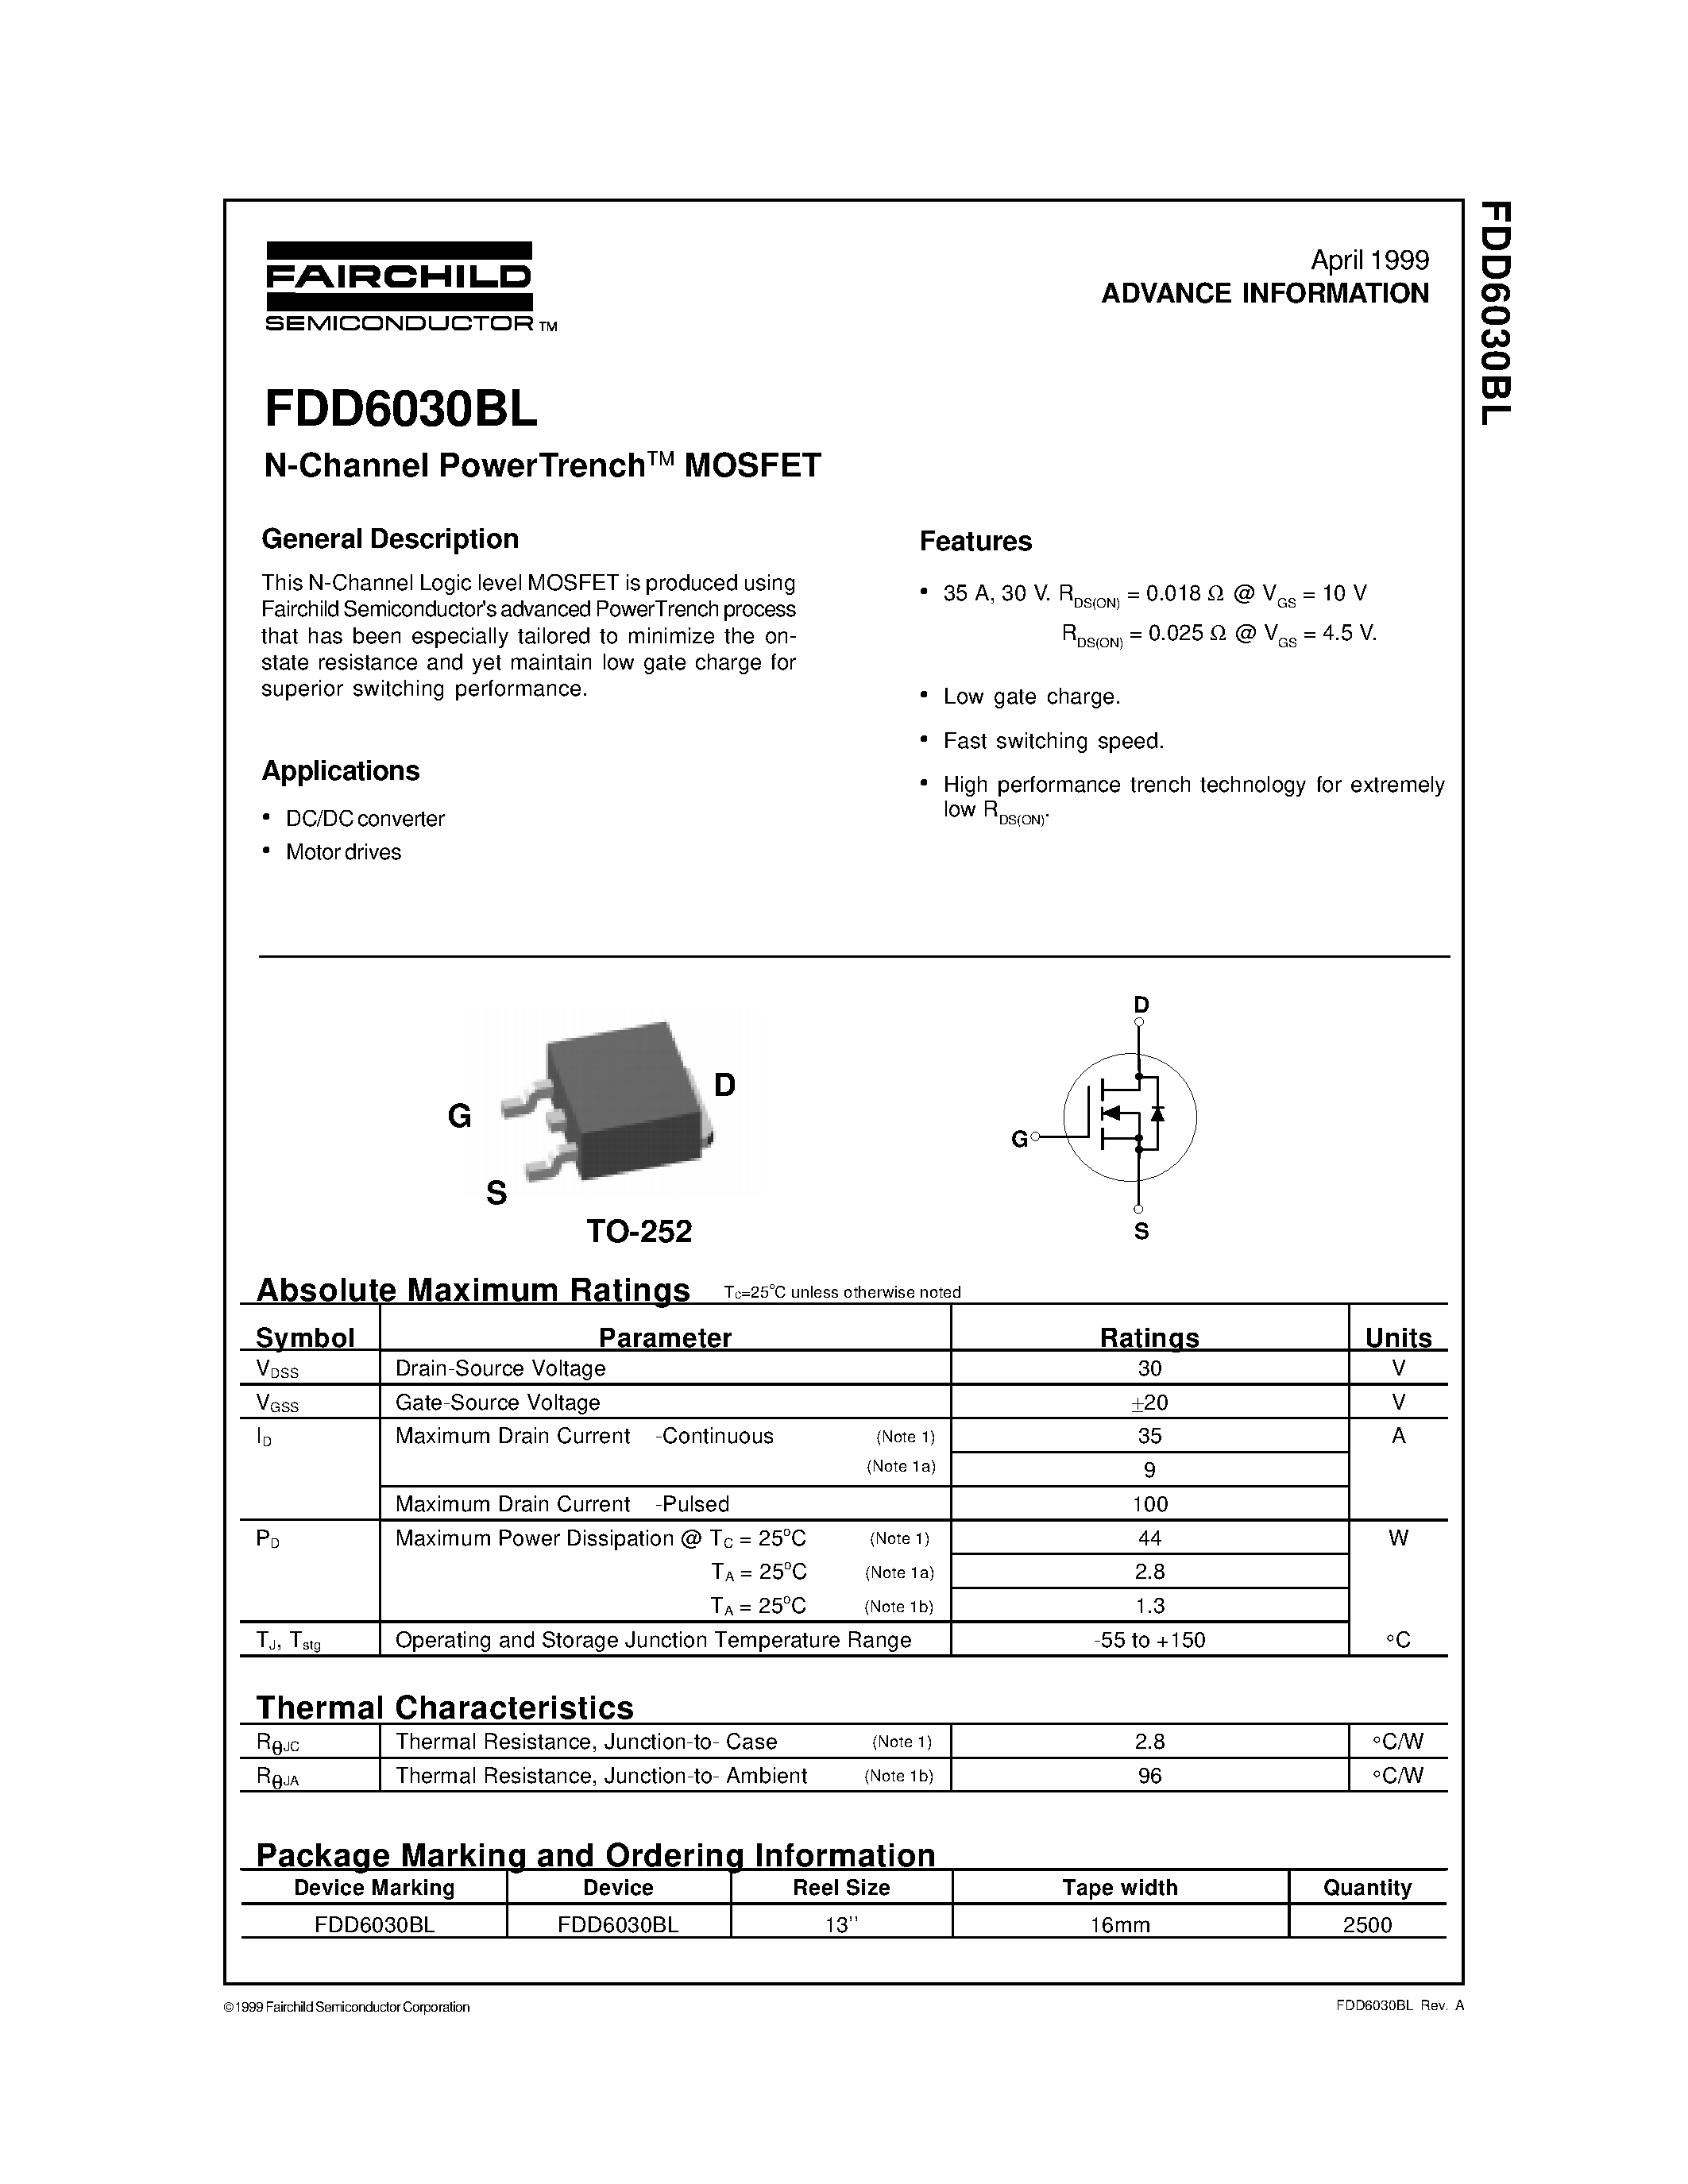 Даташит FDD6030BL - N-Channel PowerTrenchTM MOSFET страница 1